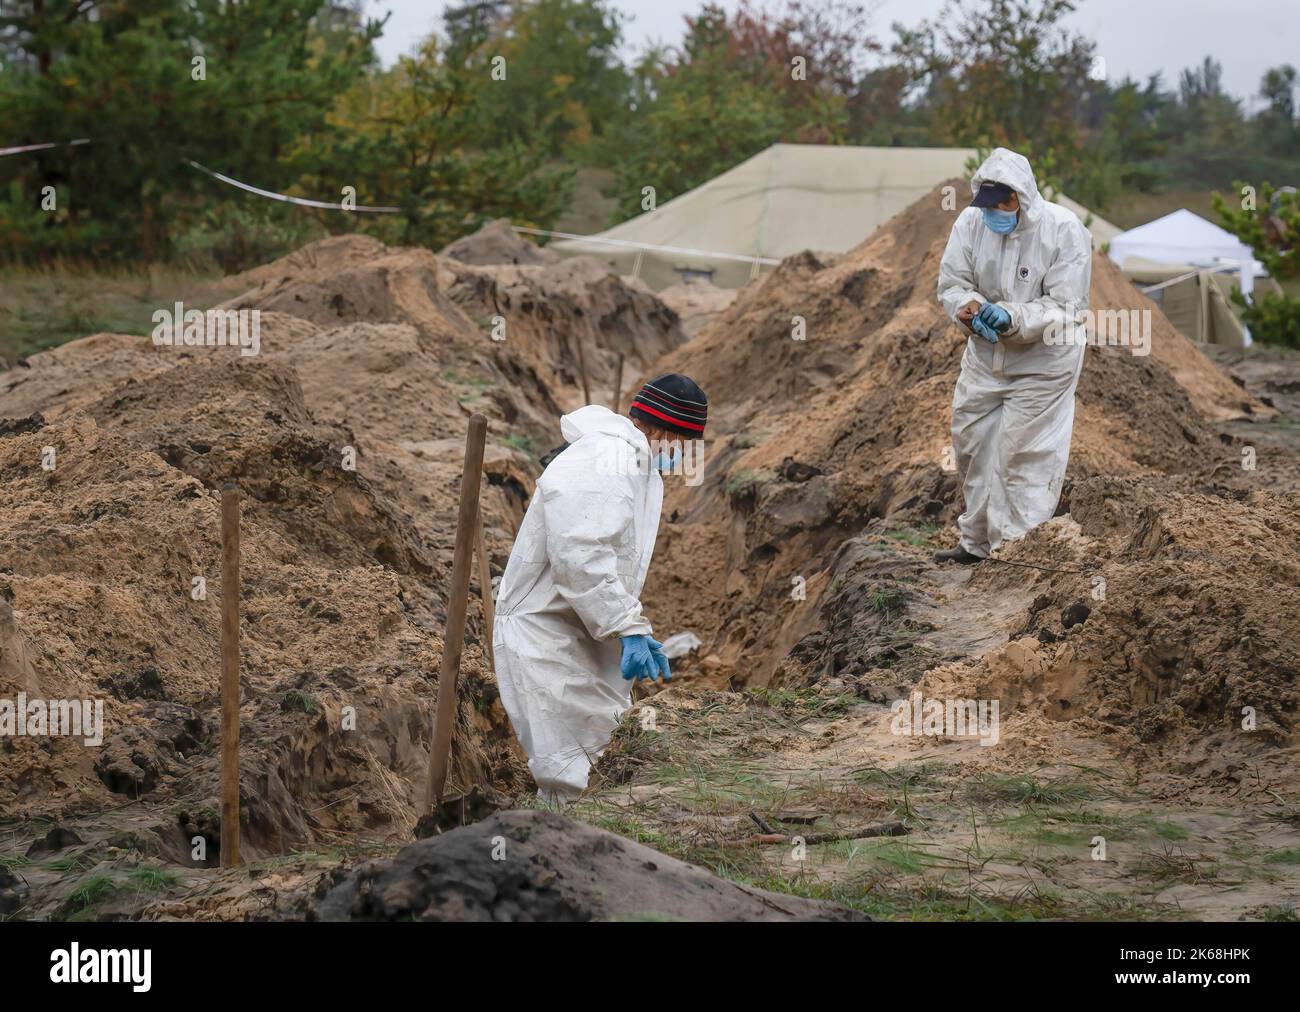 Investigators wearing protective gears are seen exhuming Ukrainian soldiers' bodies from a burial site in Lyman. At least 32 Ukrainian soldiers’ bodies have been exhumed from a mass grave in Lyman, a city in Donetsk region that was under Russian occupation. Authorities said they were buried together and initial investigation has shown some bodies were blindfolded and tied on the hands, which suggested signs of torture and execution. Another 22 civilians, including children were exhumed from another burial site nearby. Both sites located at the edge of a cemetery. Officials said they are expect Stock Photo